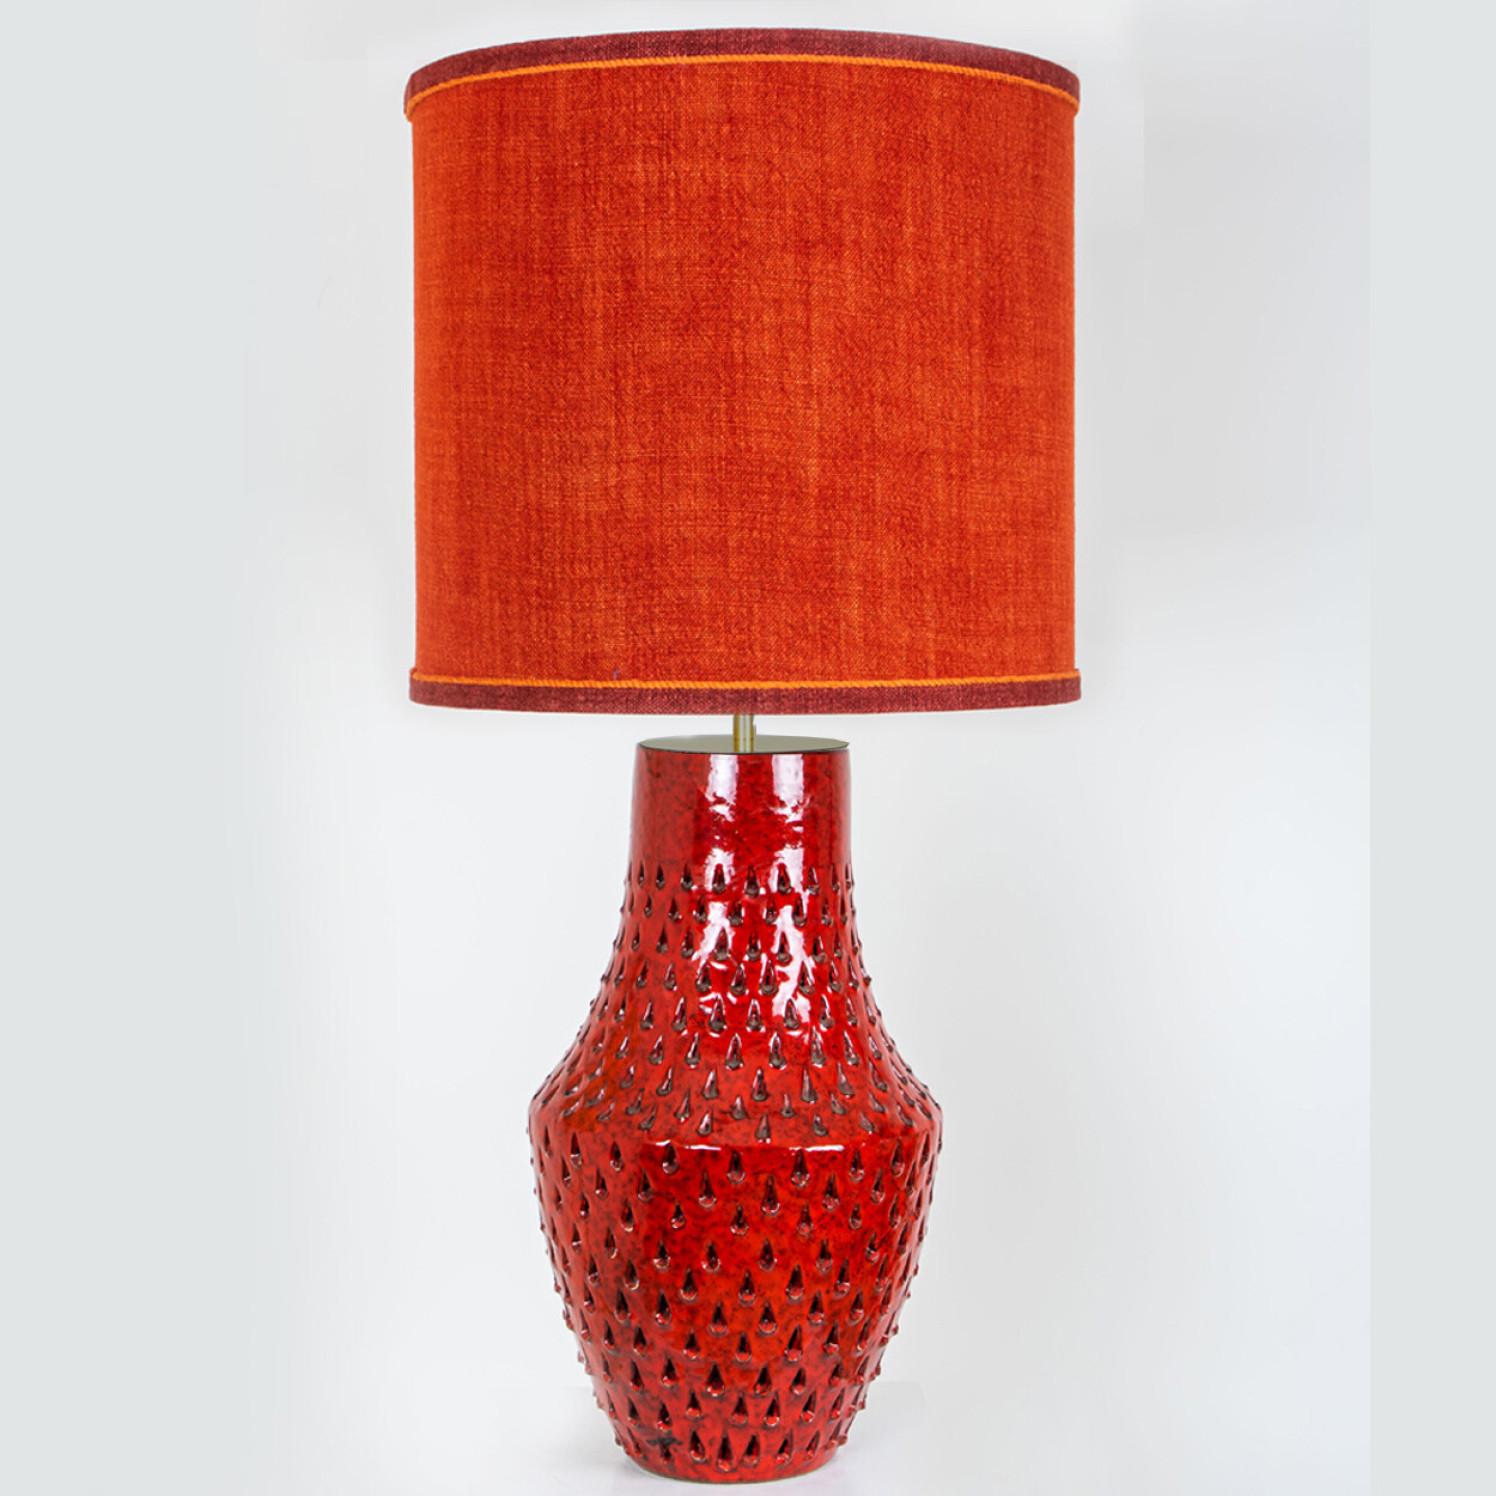 Fratelli Fanciullacci Ceramic Table Lamp with New Custom Made Lampshade, 1970 For Sale 7